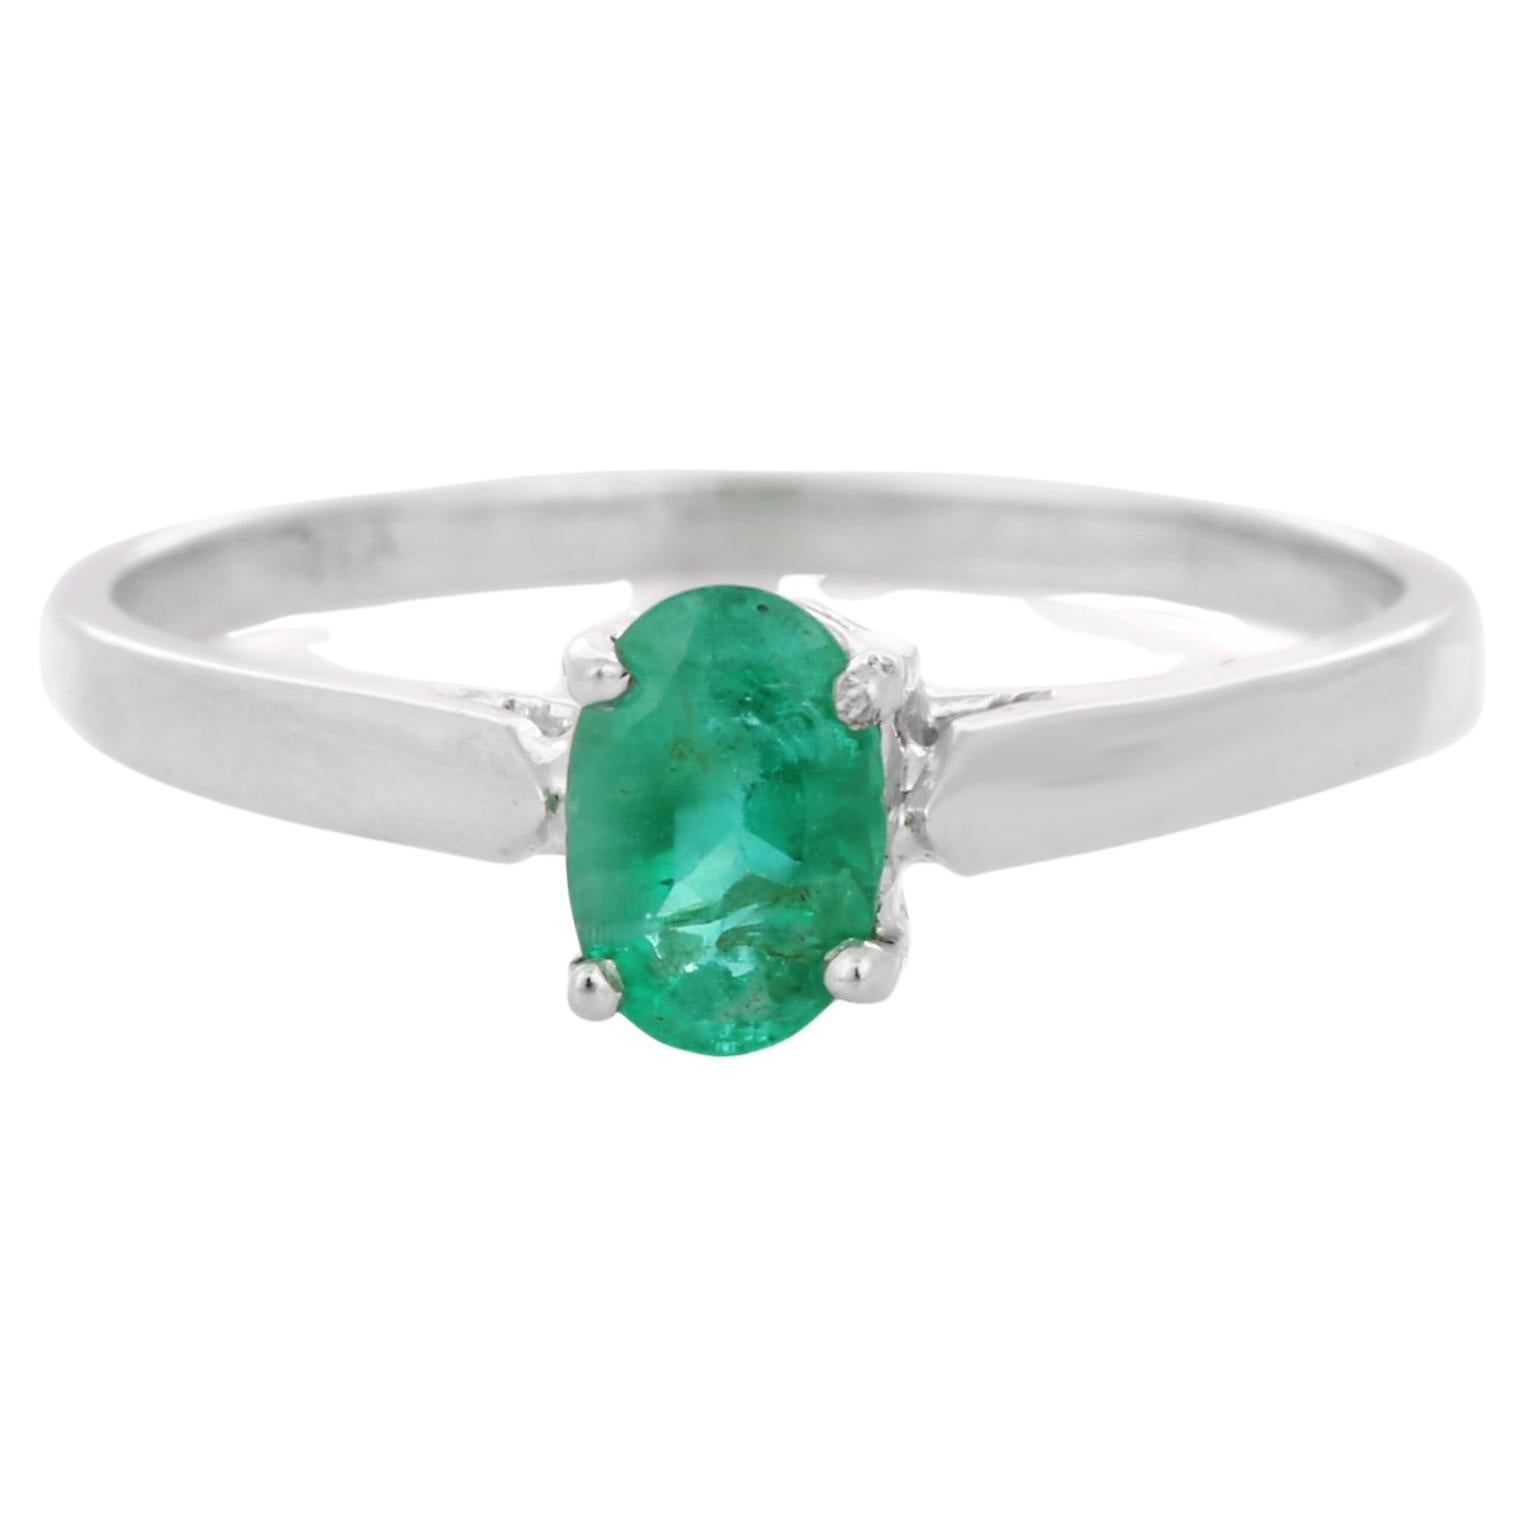 For Sale:  18K White Gold Minimalist Oval Cut Emerald Gemstone Stackable Solitaire Ring